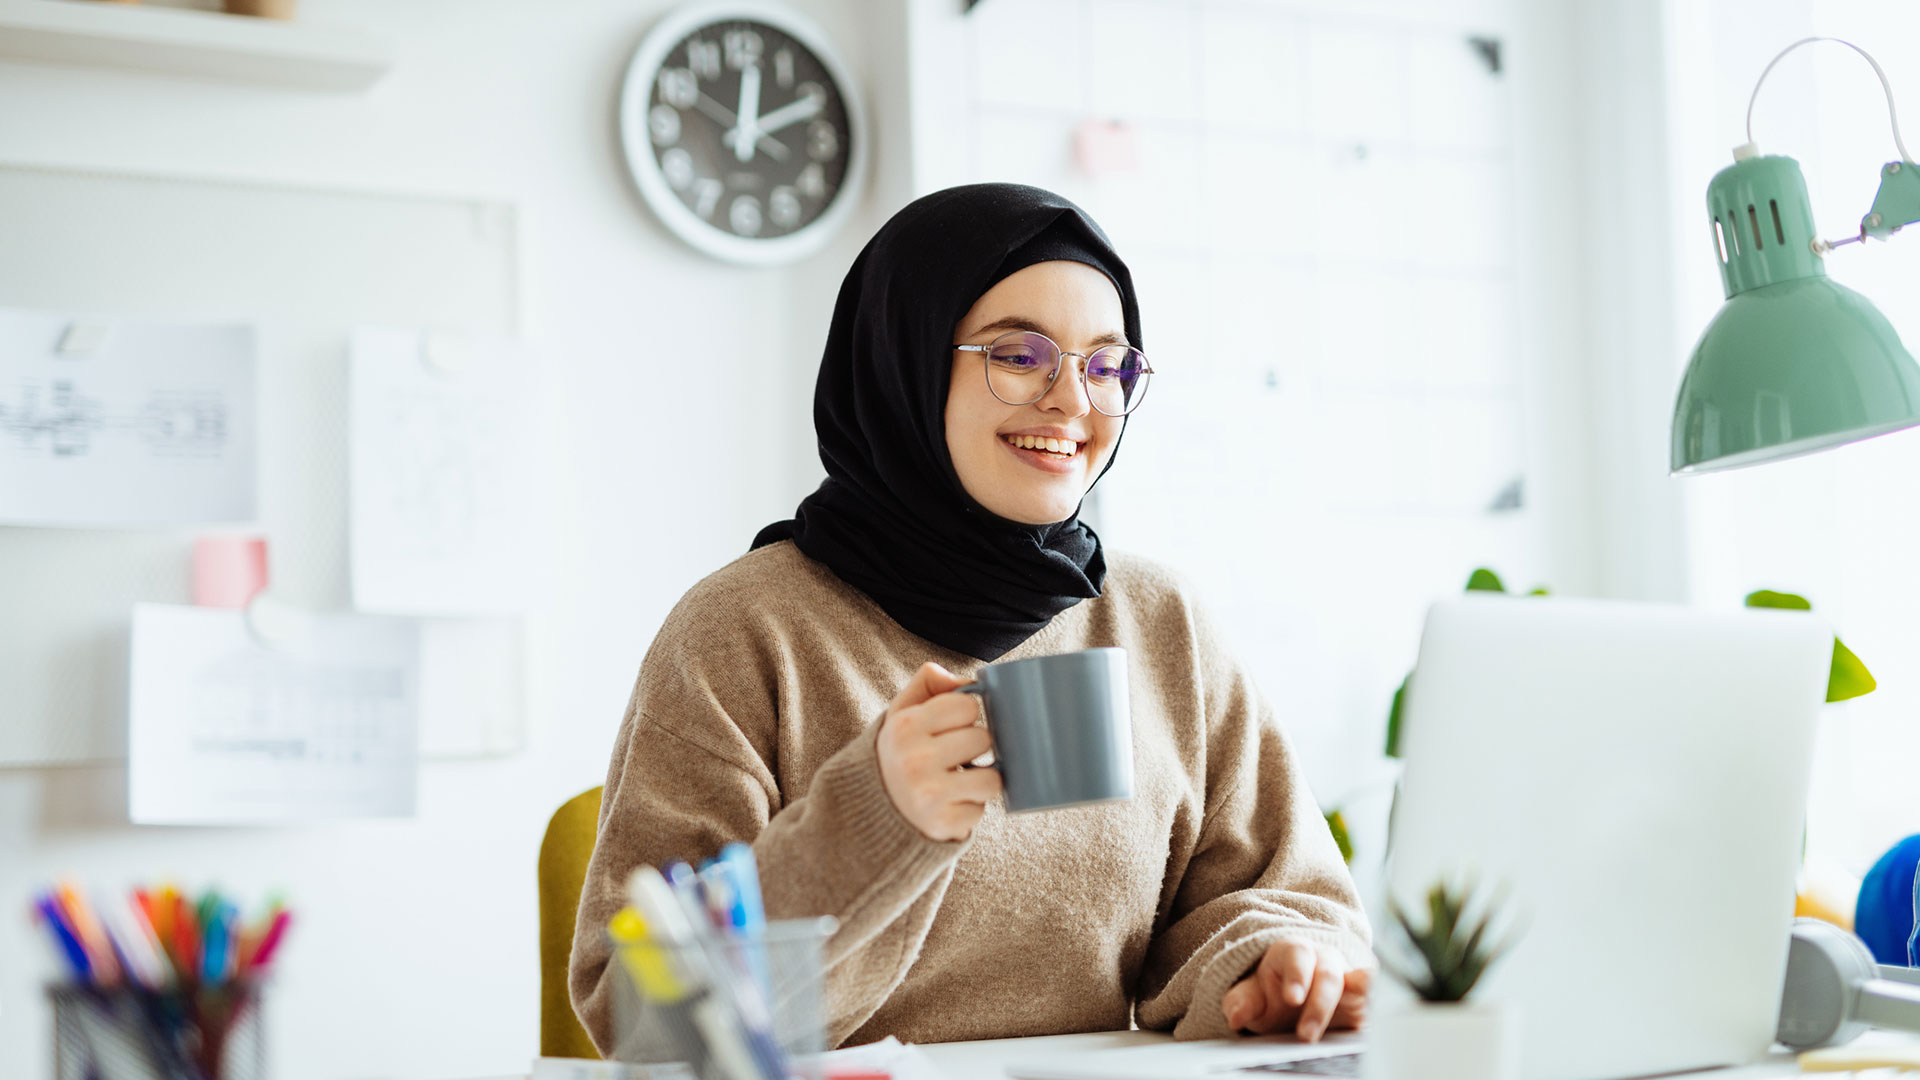 Middle Eastern woman with black hijab working on laptop in office